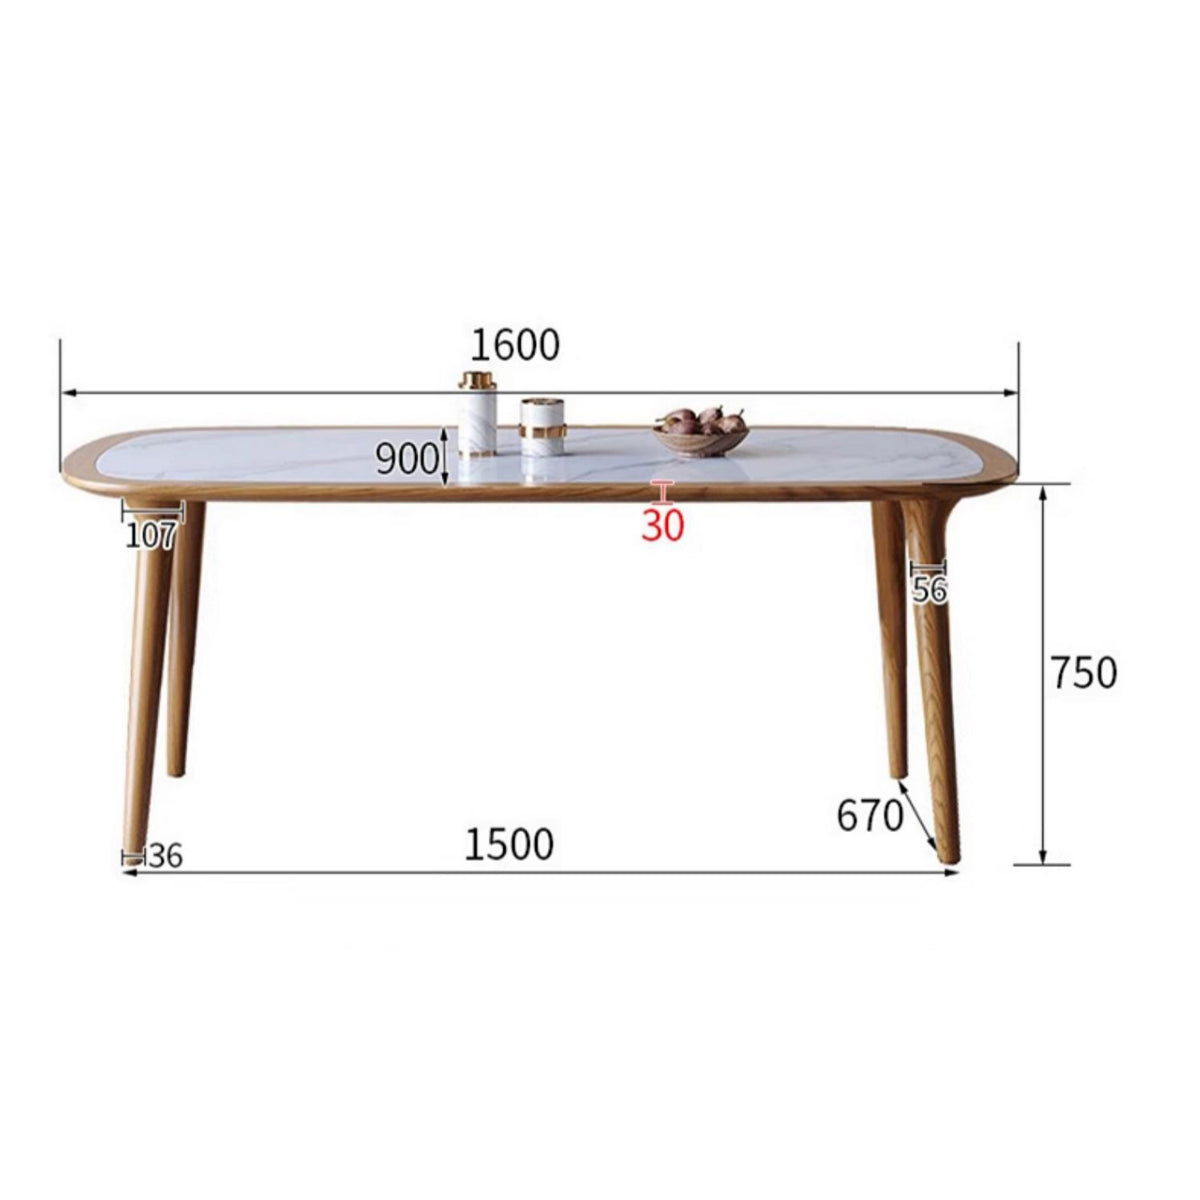 Sleek Matte White Sintered Stone & Ash Wood Dining Table – Modern Elegance for Your Home fmbs-002